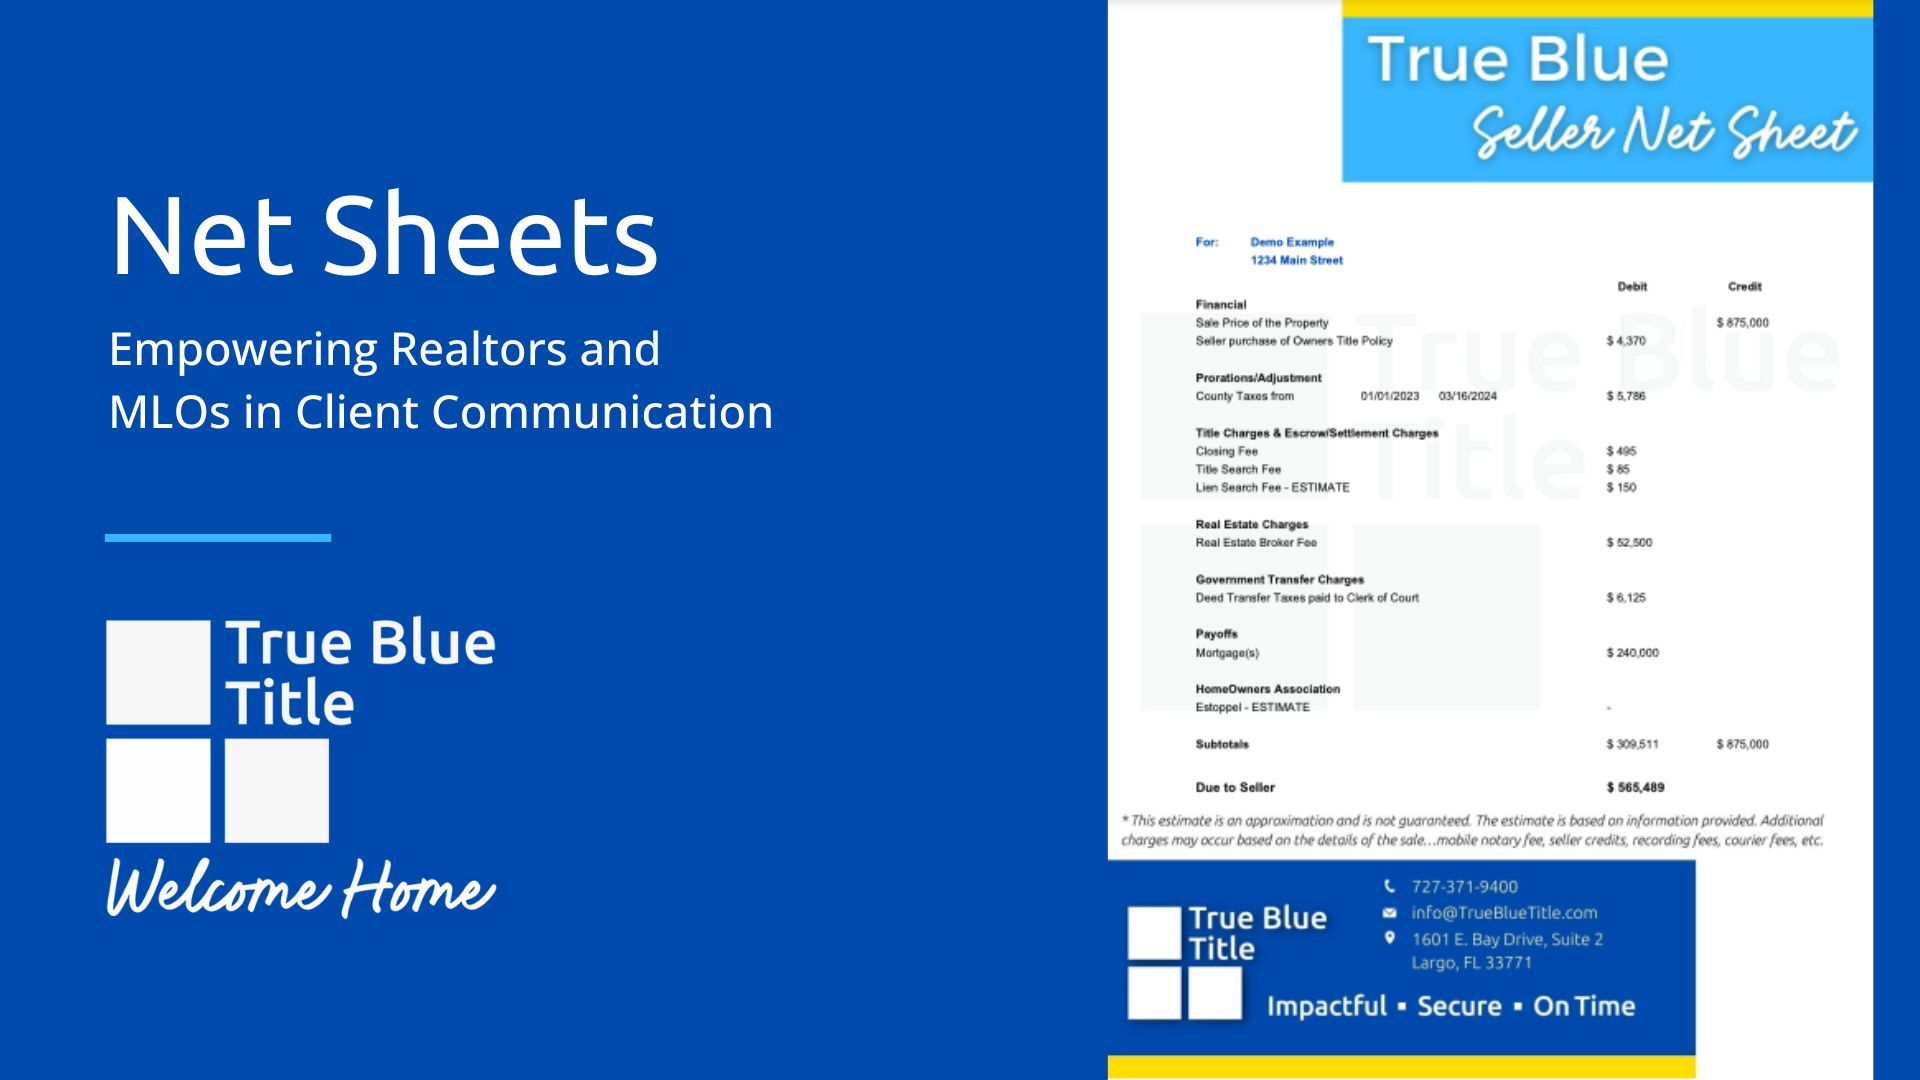 True Blue Title ad showing a sample Seller Net Sheet and contact details.